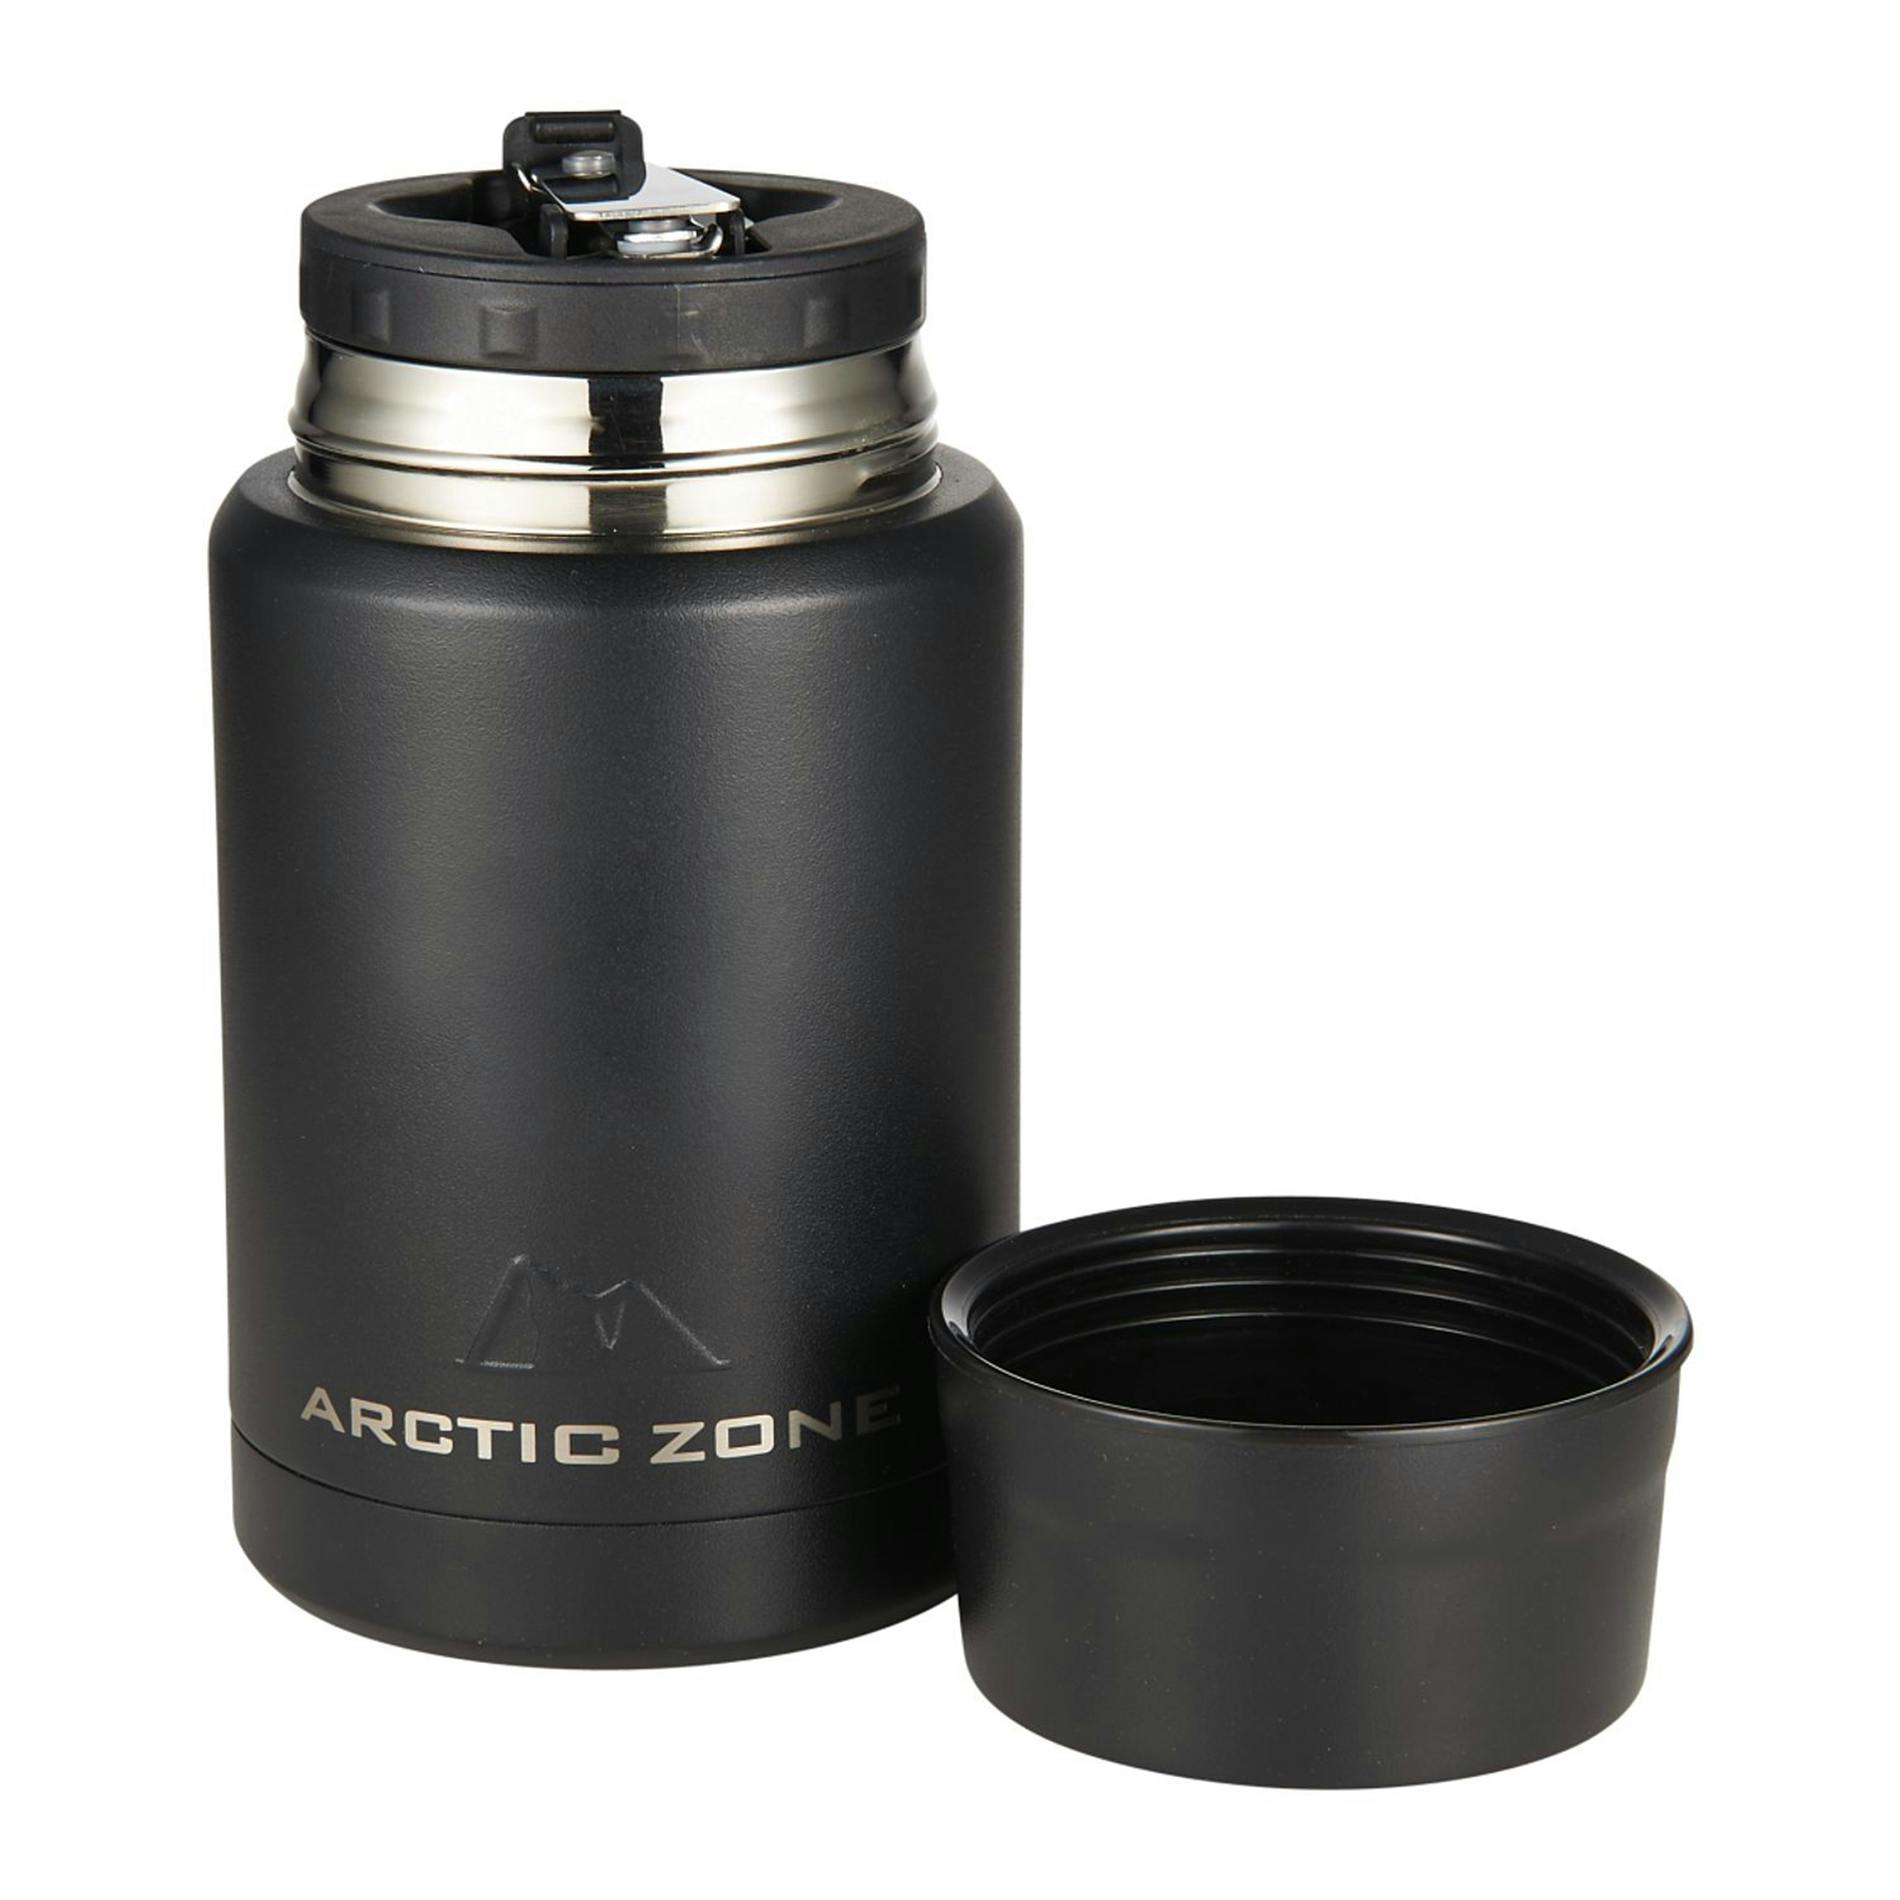 Arctic Zone® Titan Copper Insulated Food Storage - additional Image 5